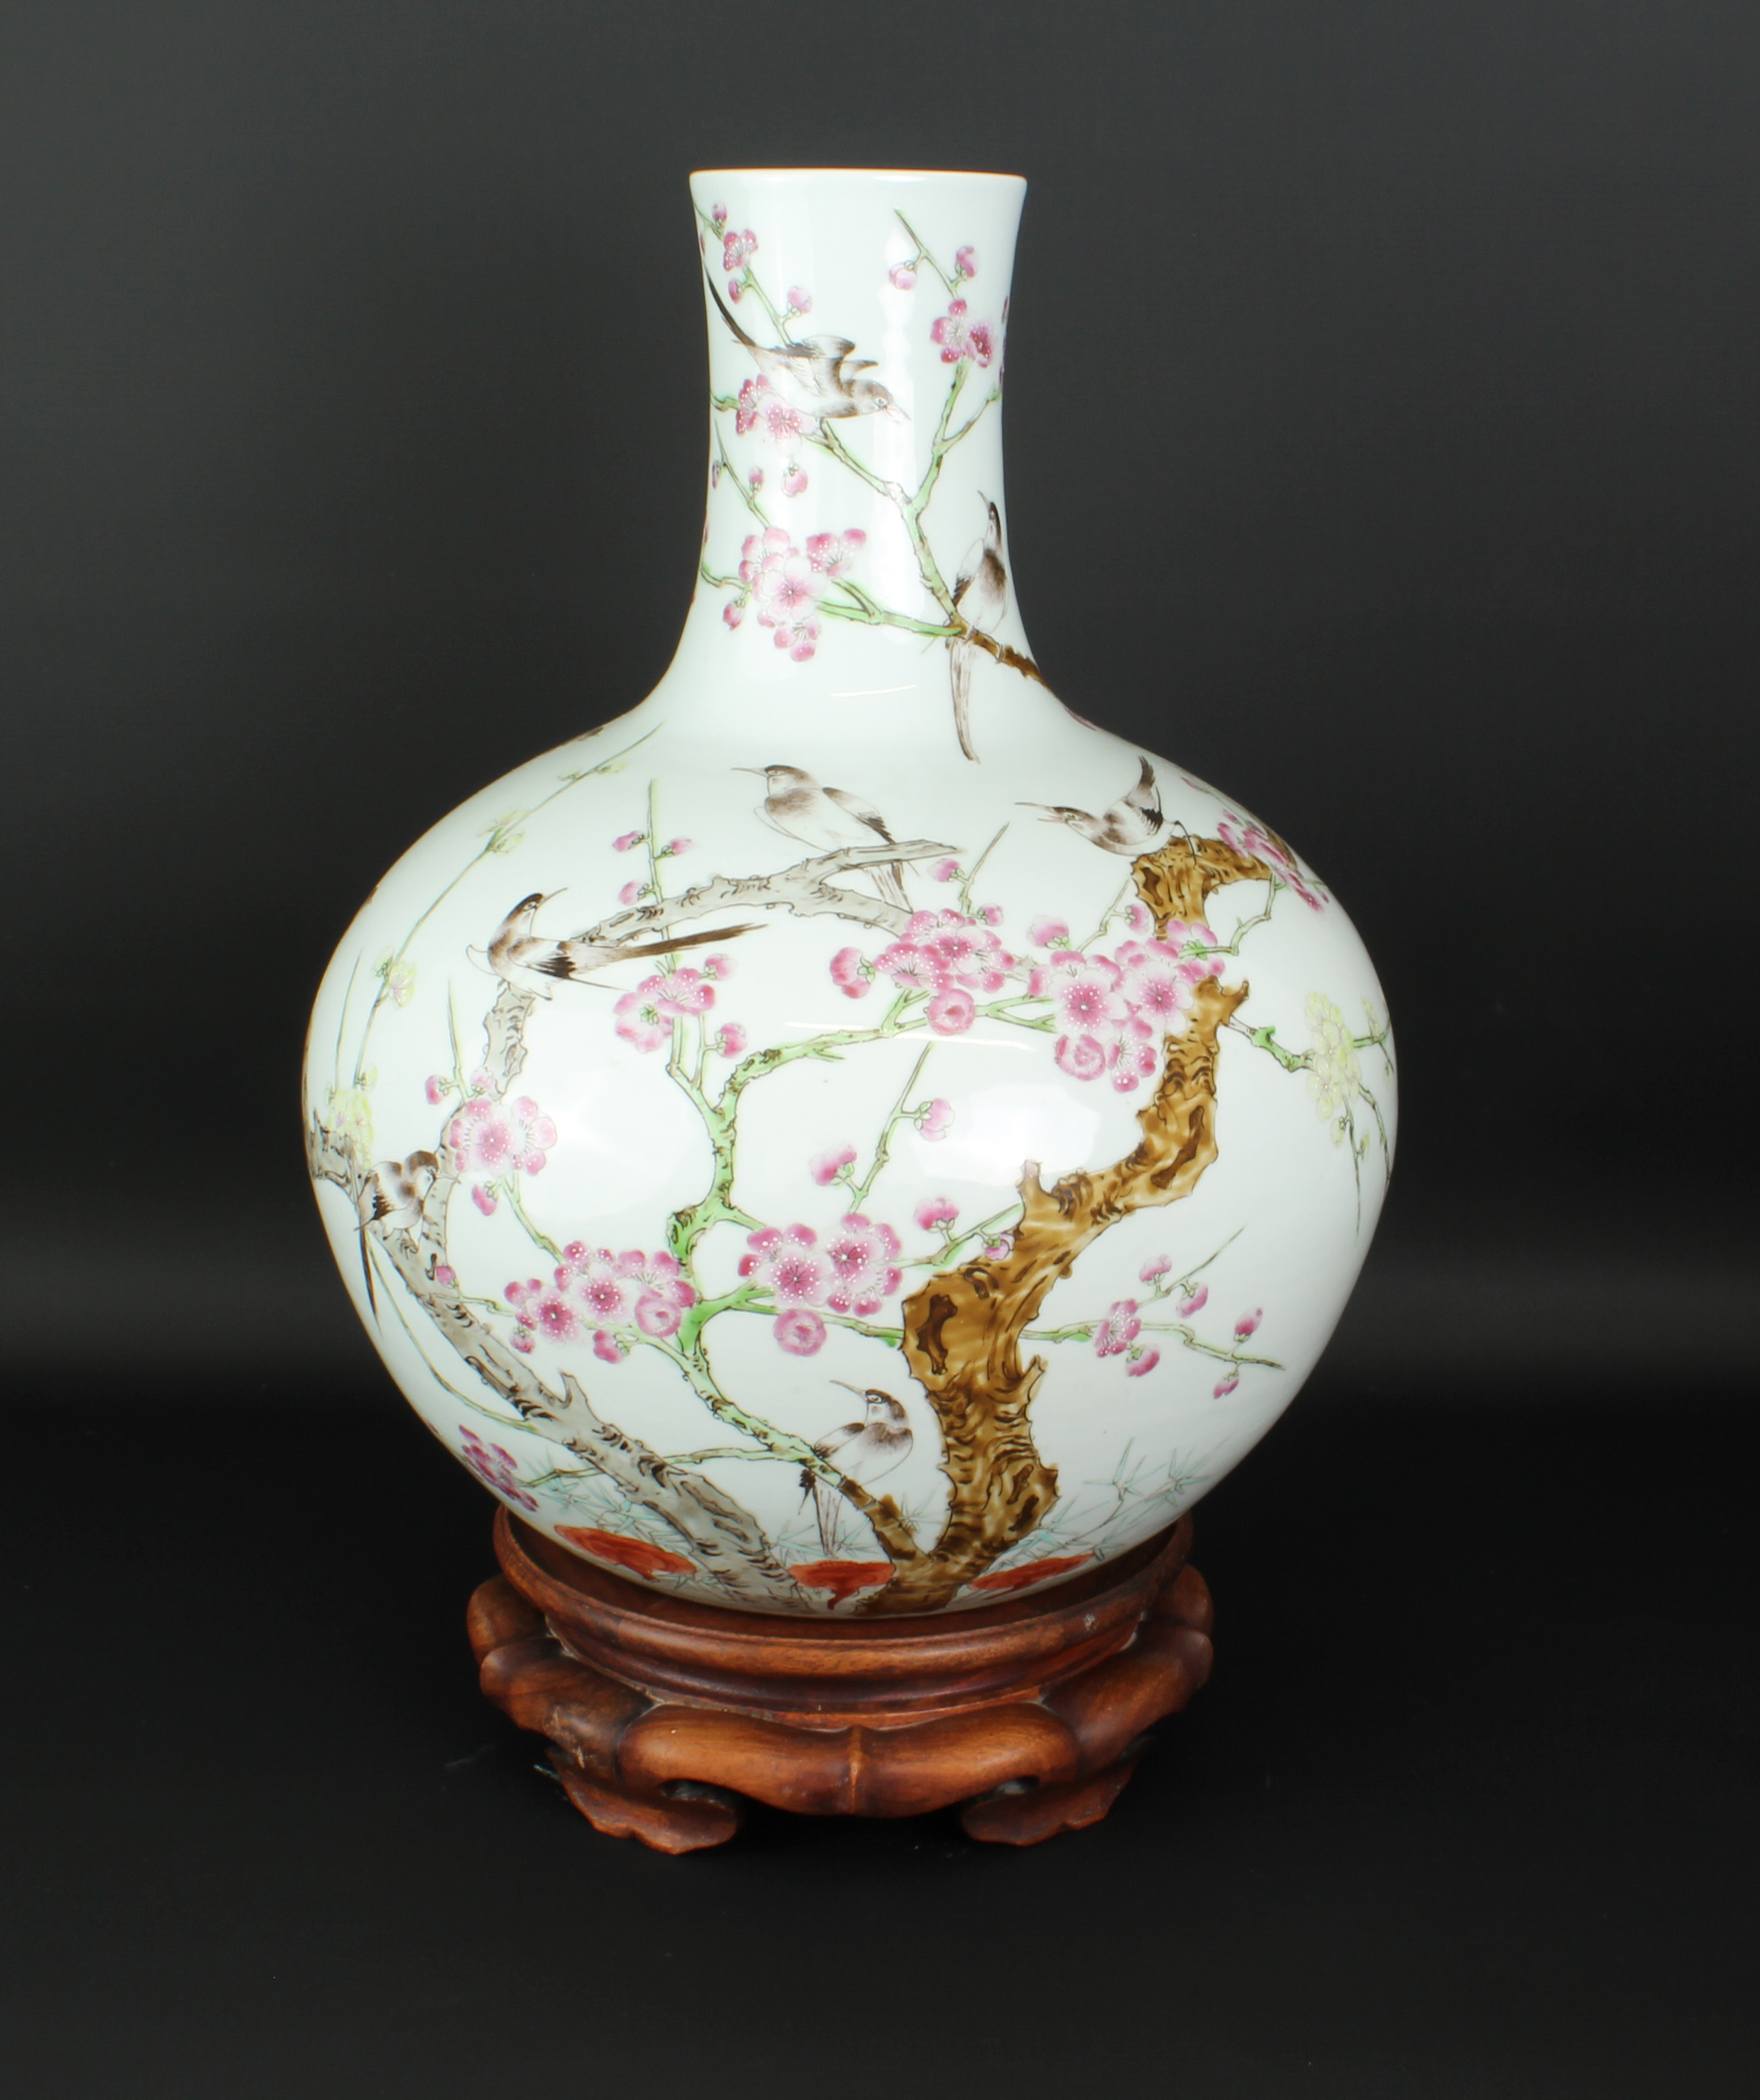 A large Chinese porcelain famille rose bottle vase - late 20th century with apocryphal Yongzheng